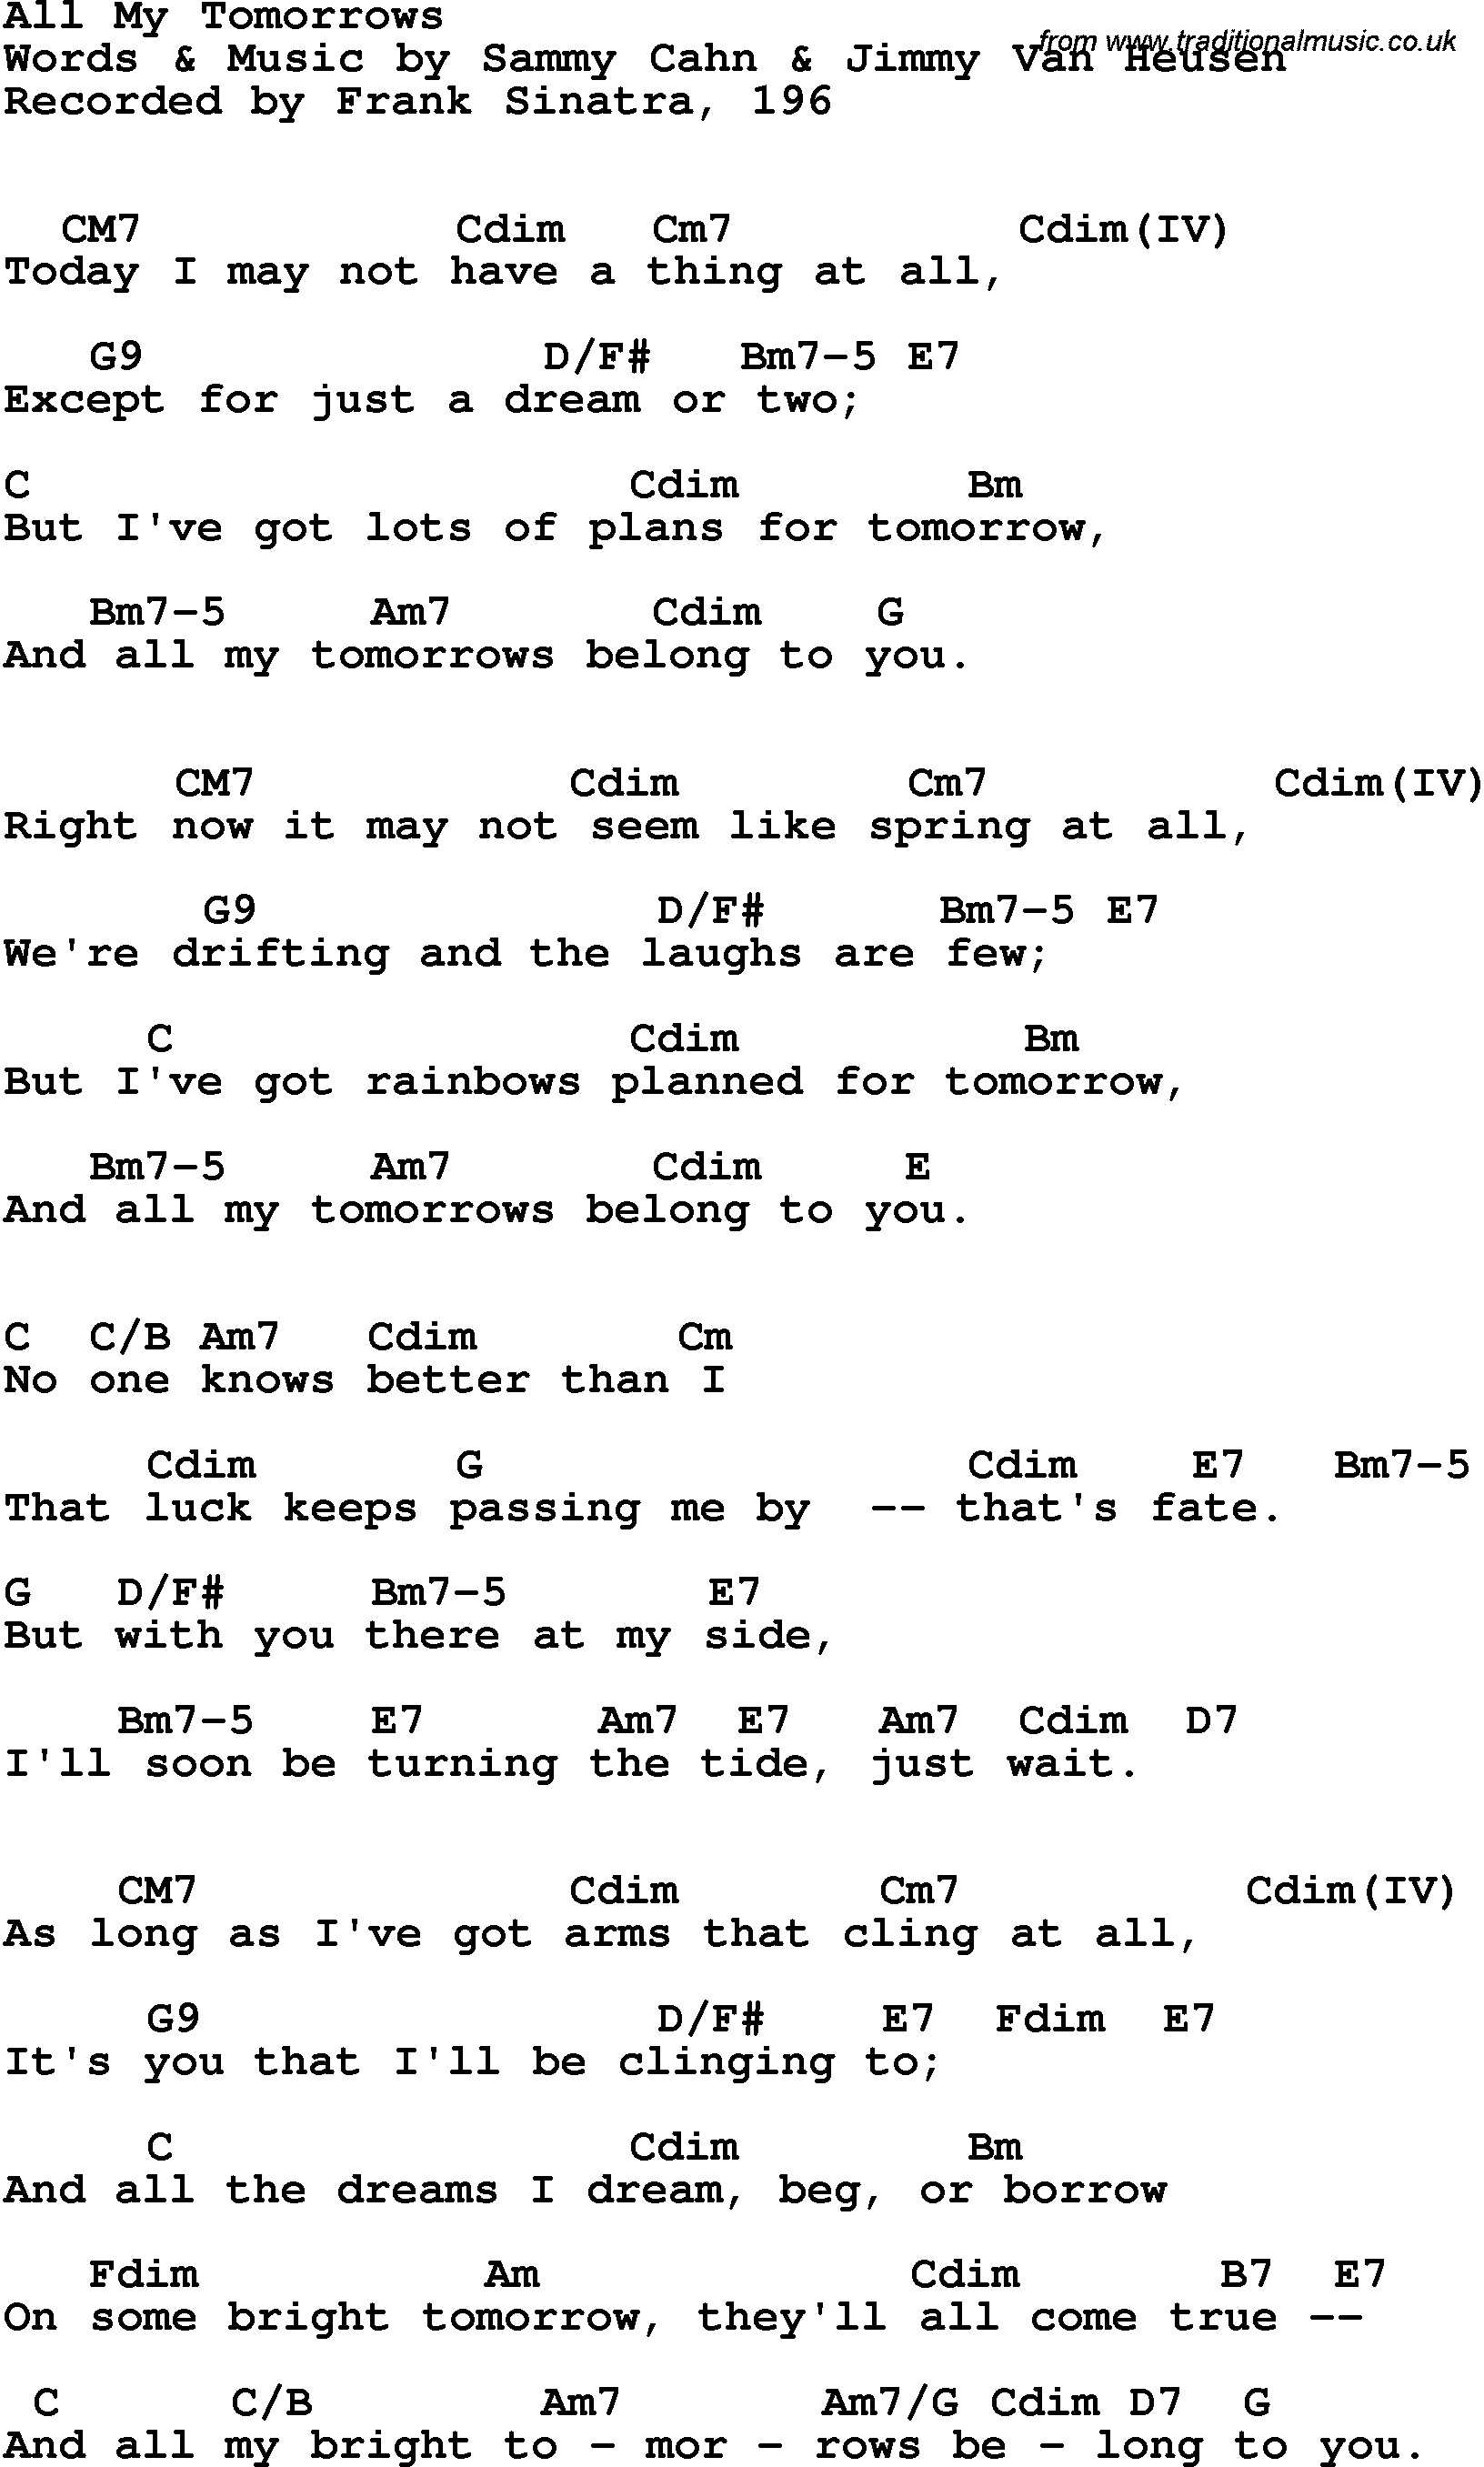 Song Lyrics with guitar chords for All My Tomorrows - Frank Sinatra, 1961